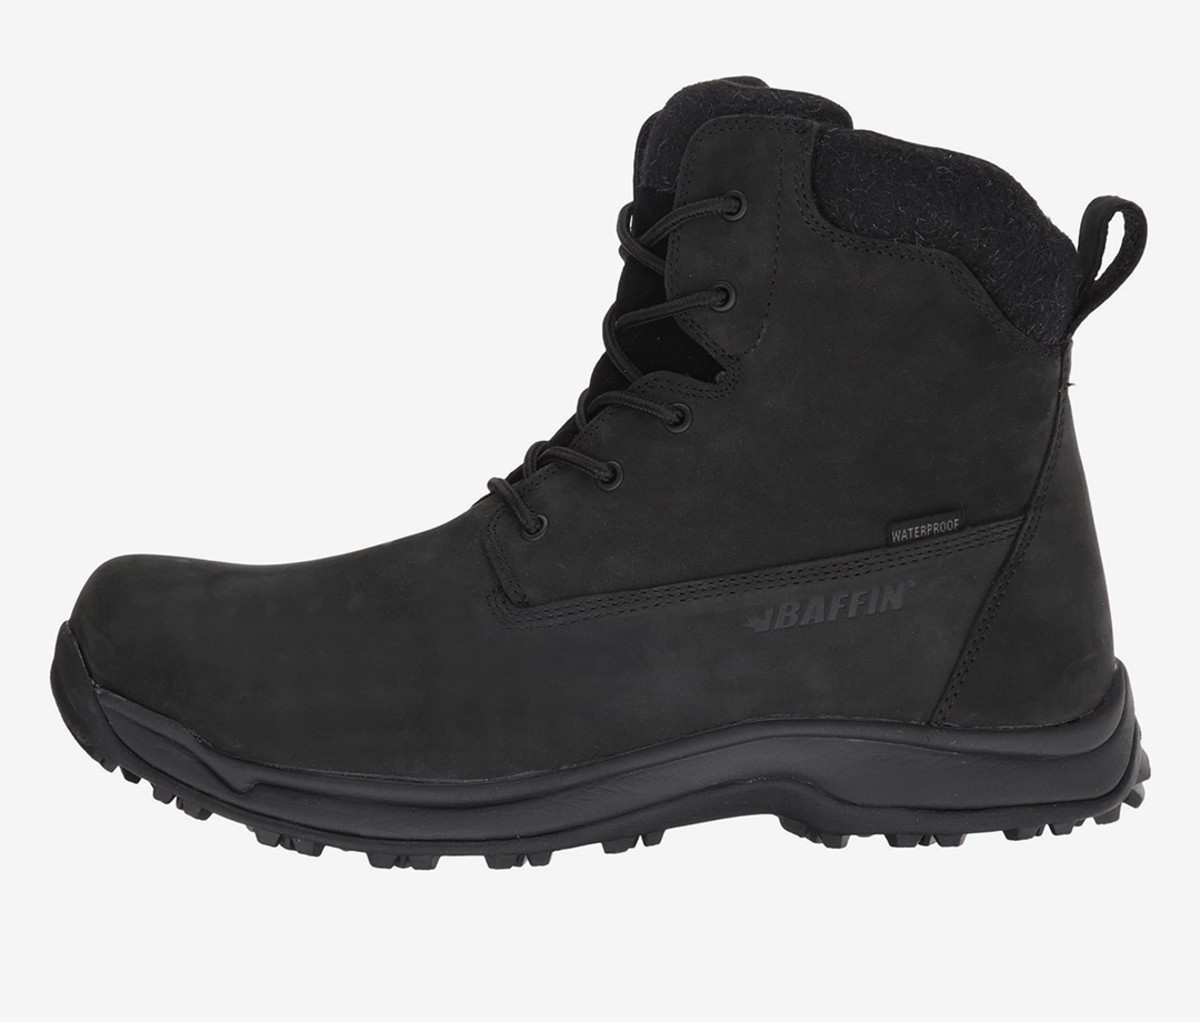 Keep The Snow Away With These Baffin Truro Boots - Men's Journal